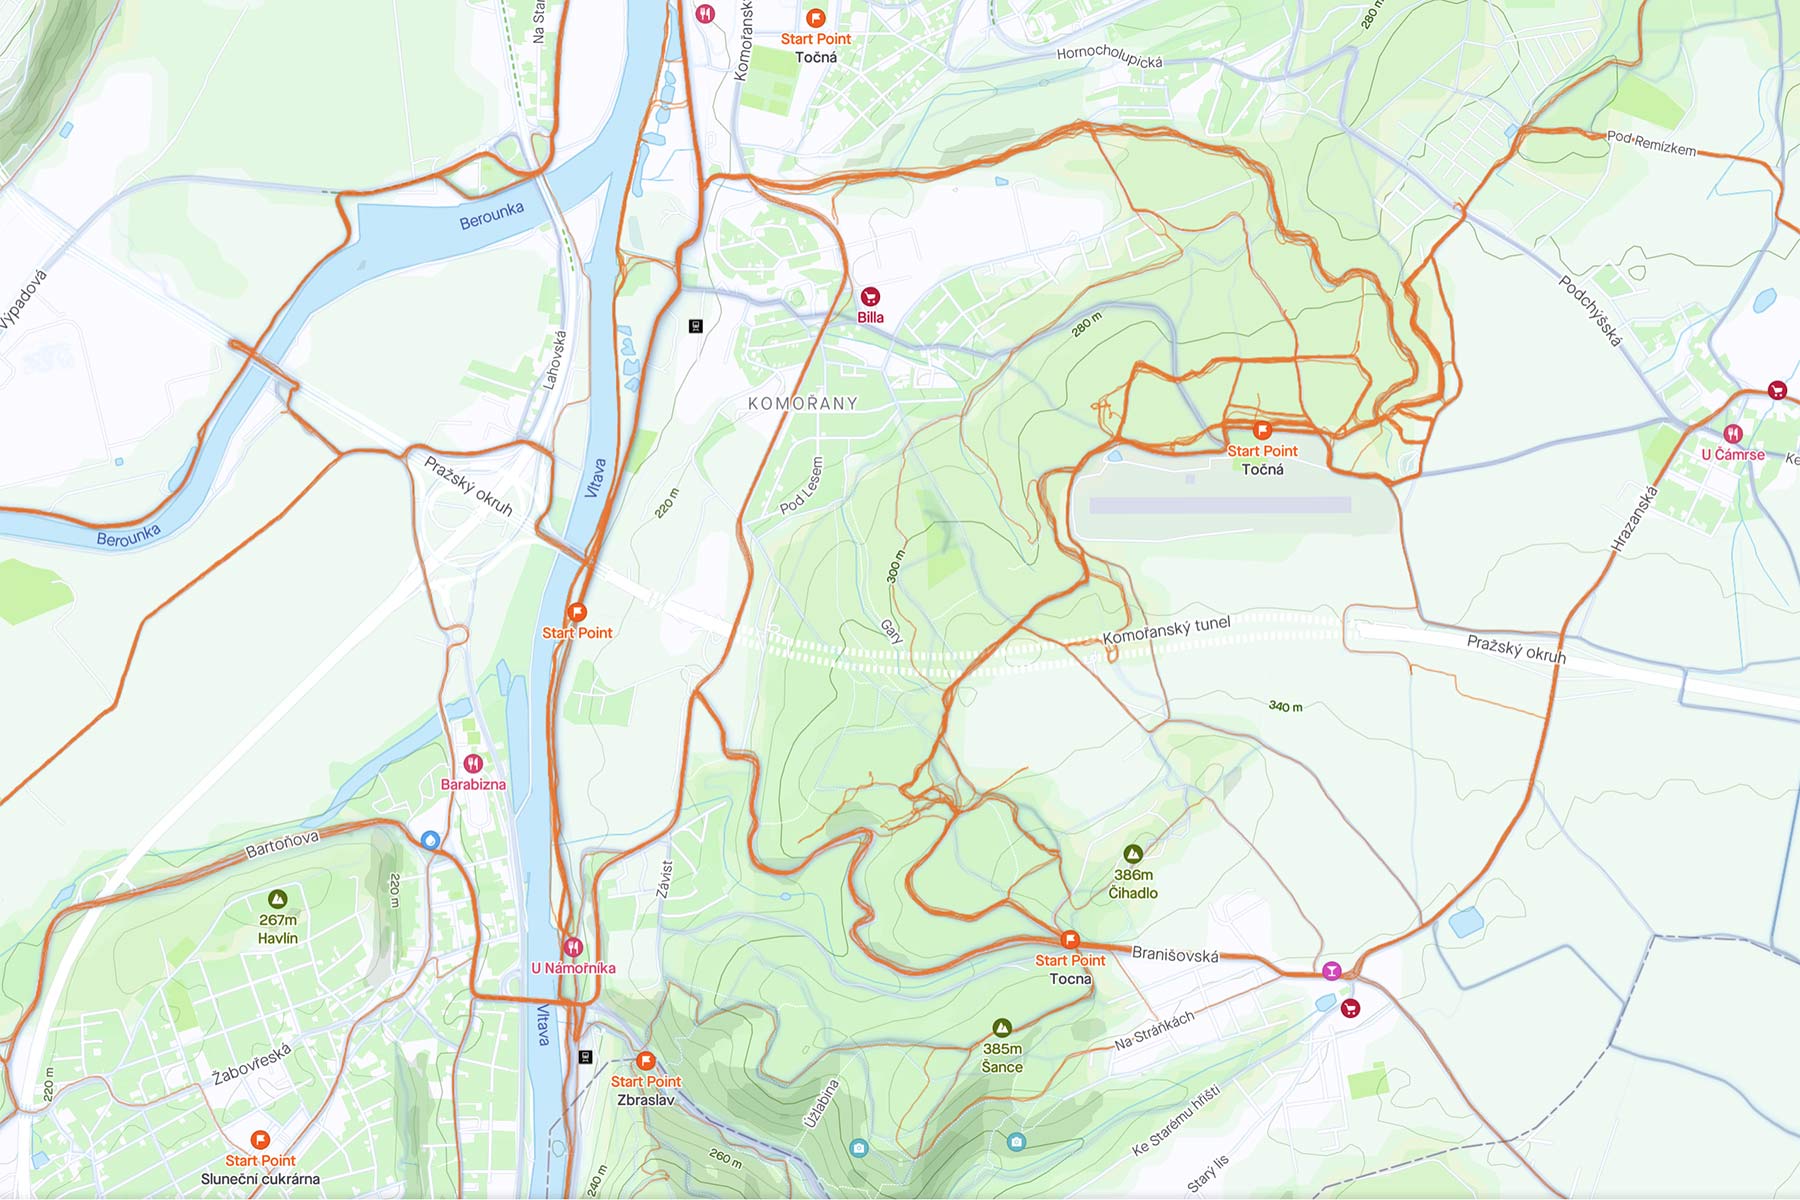 Strava Points of Interest suggestions, Planning routes with POIs, picking Start Points or cafe stops 